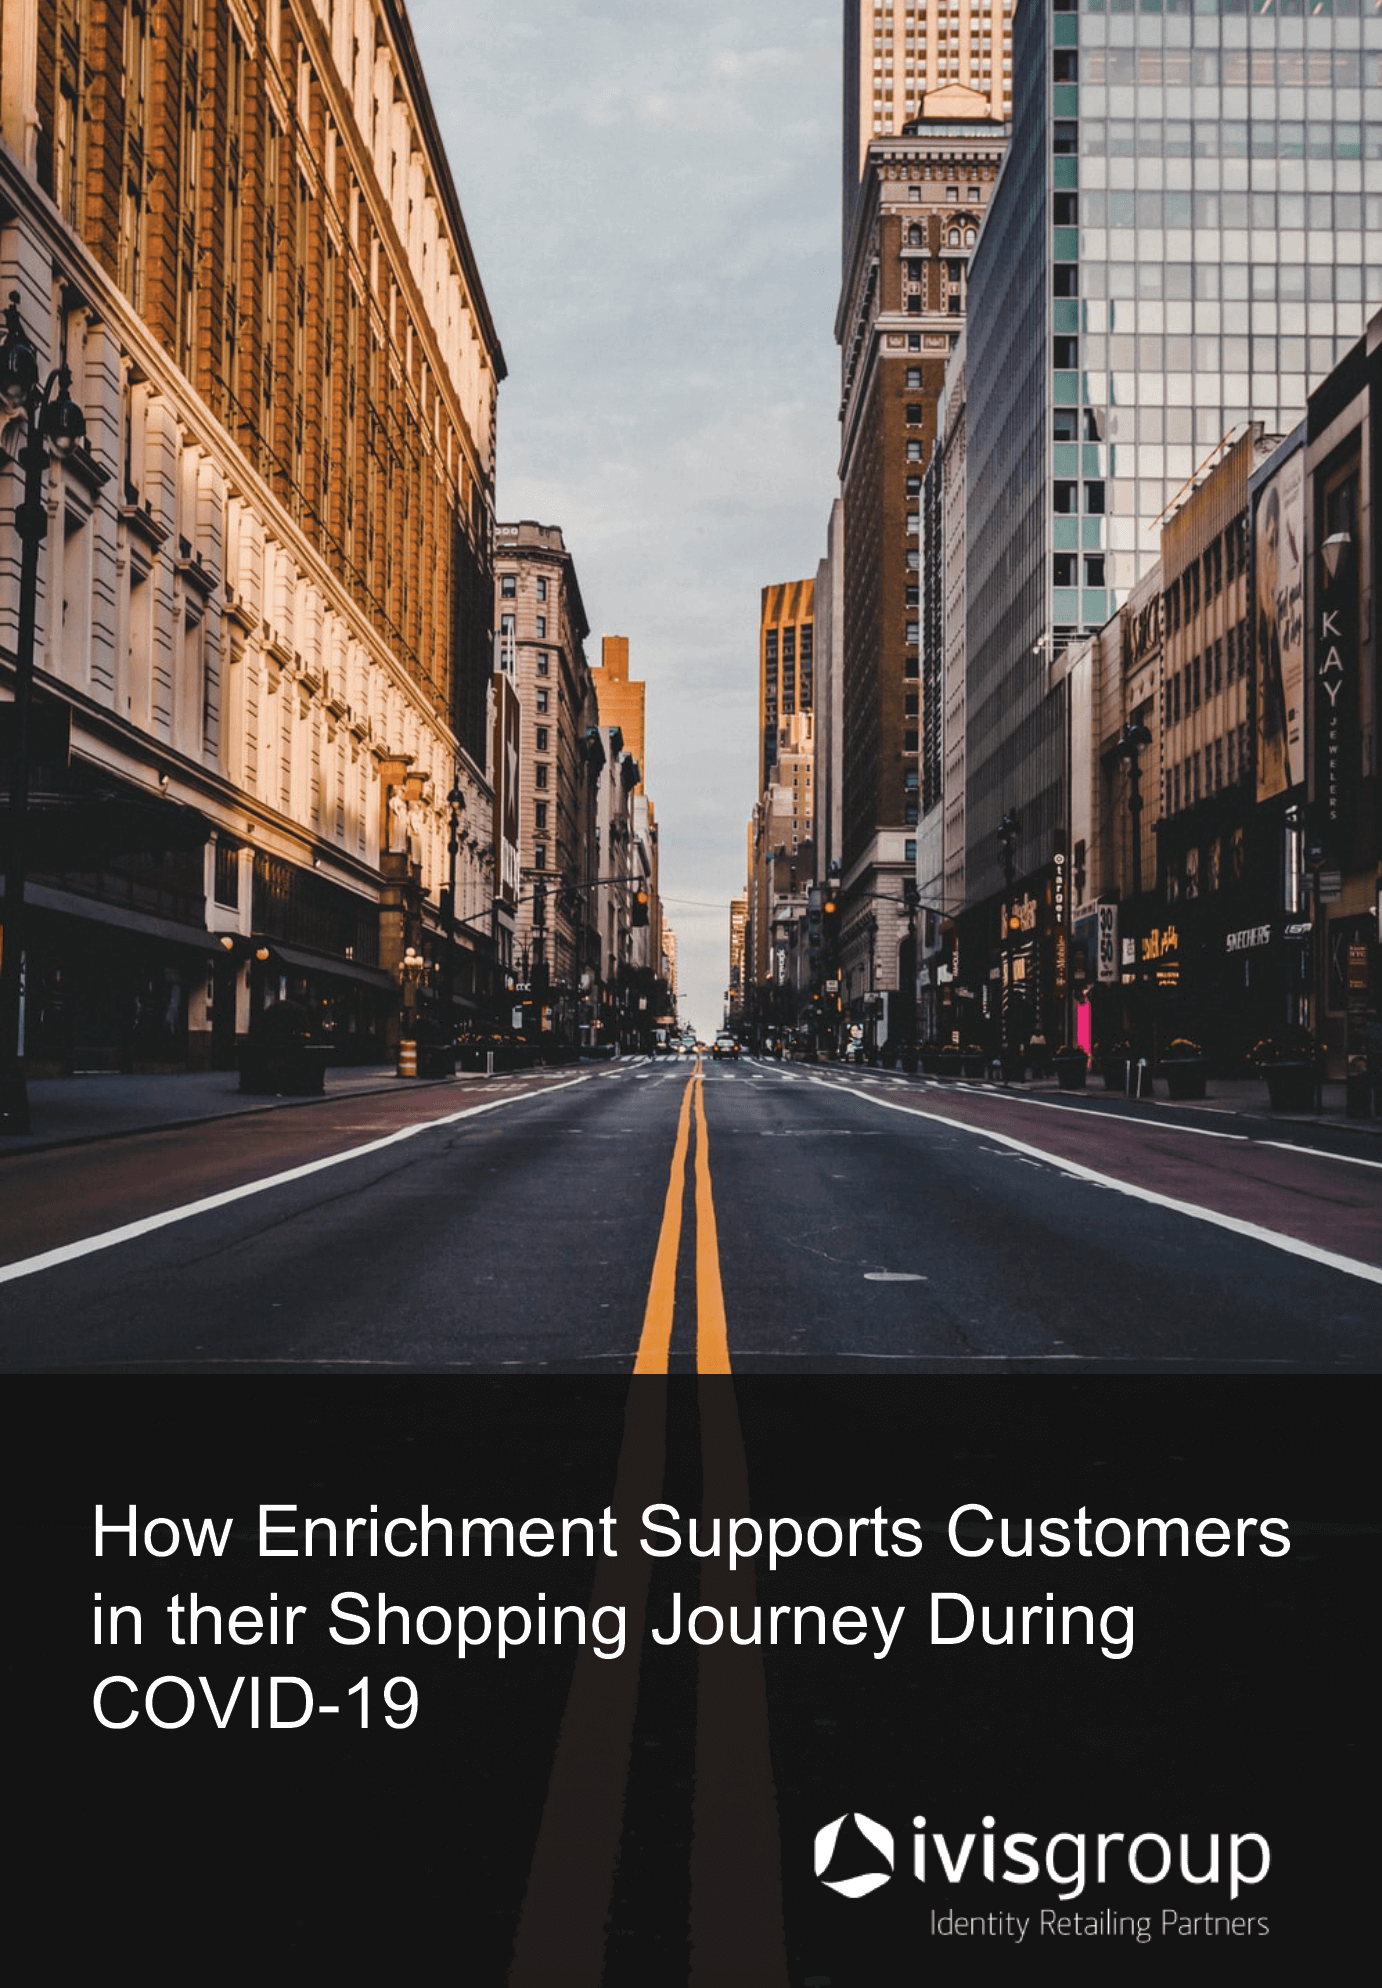 How Enrichment Supports Customers in their Shopping Journey During COVID-19